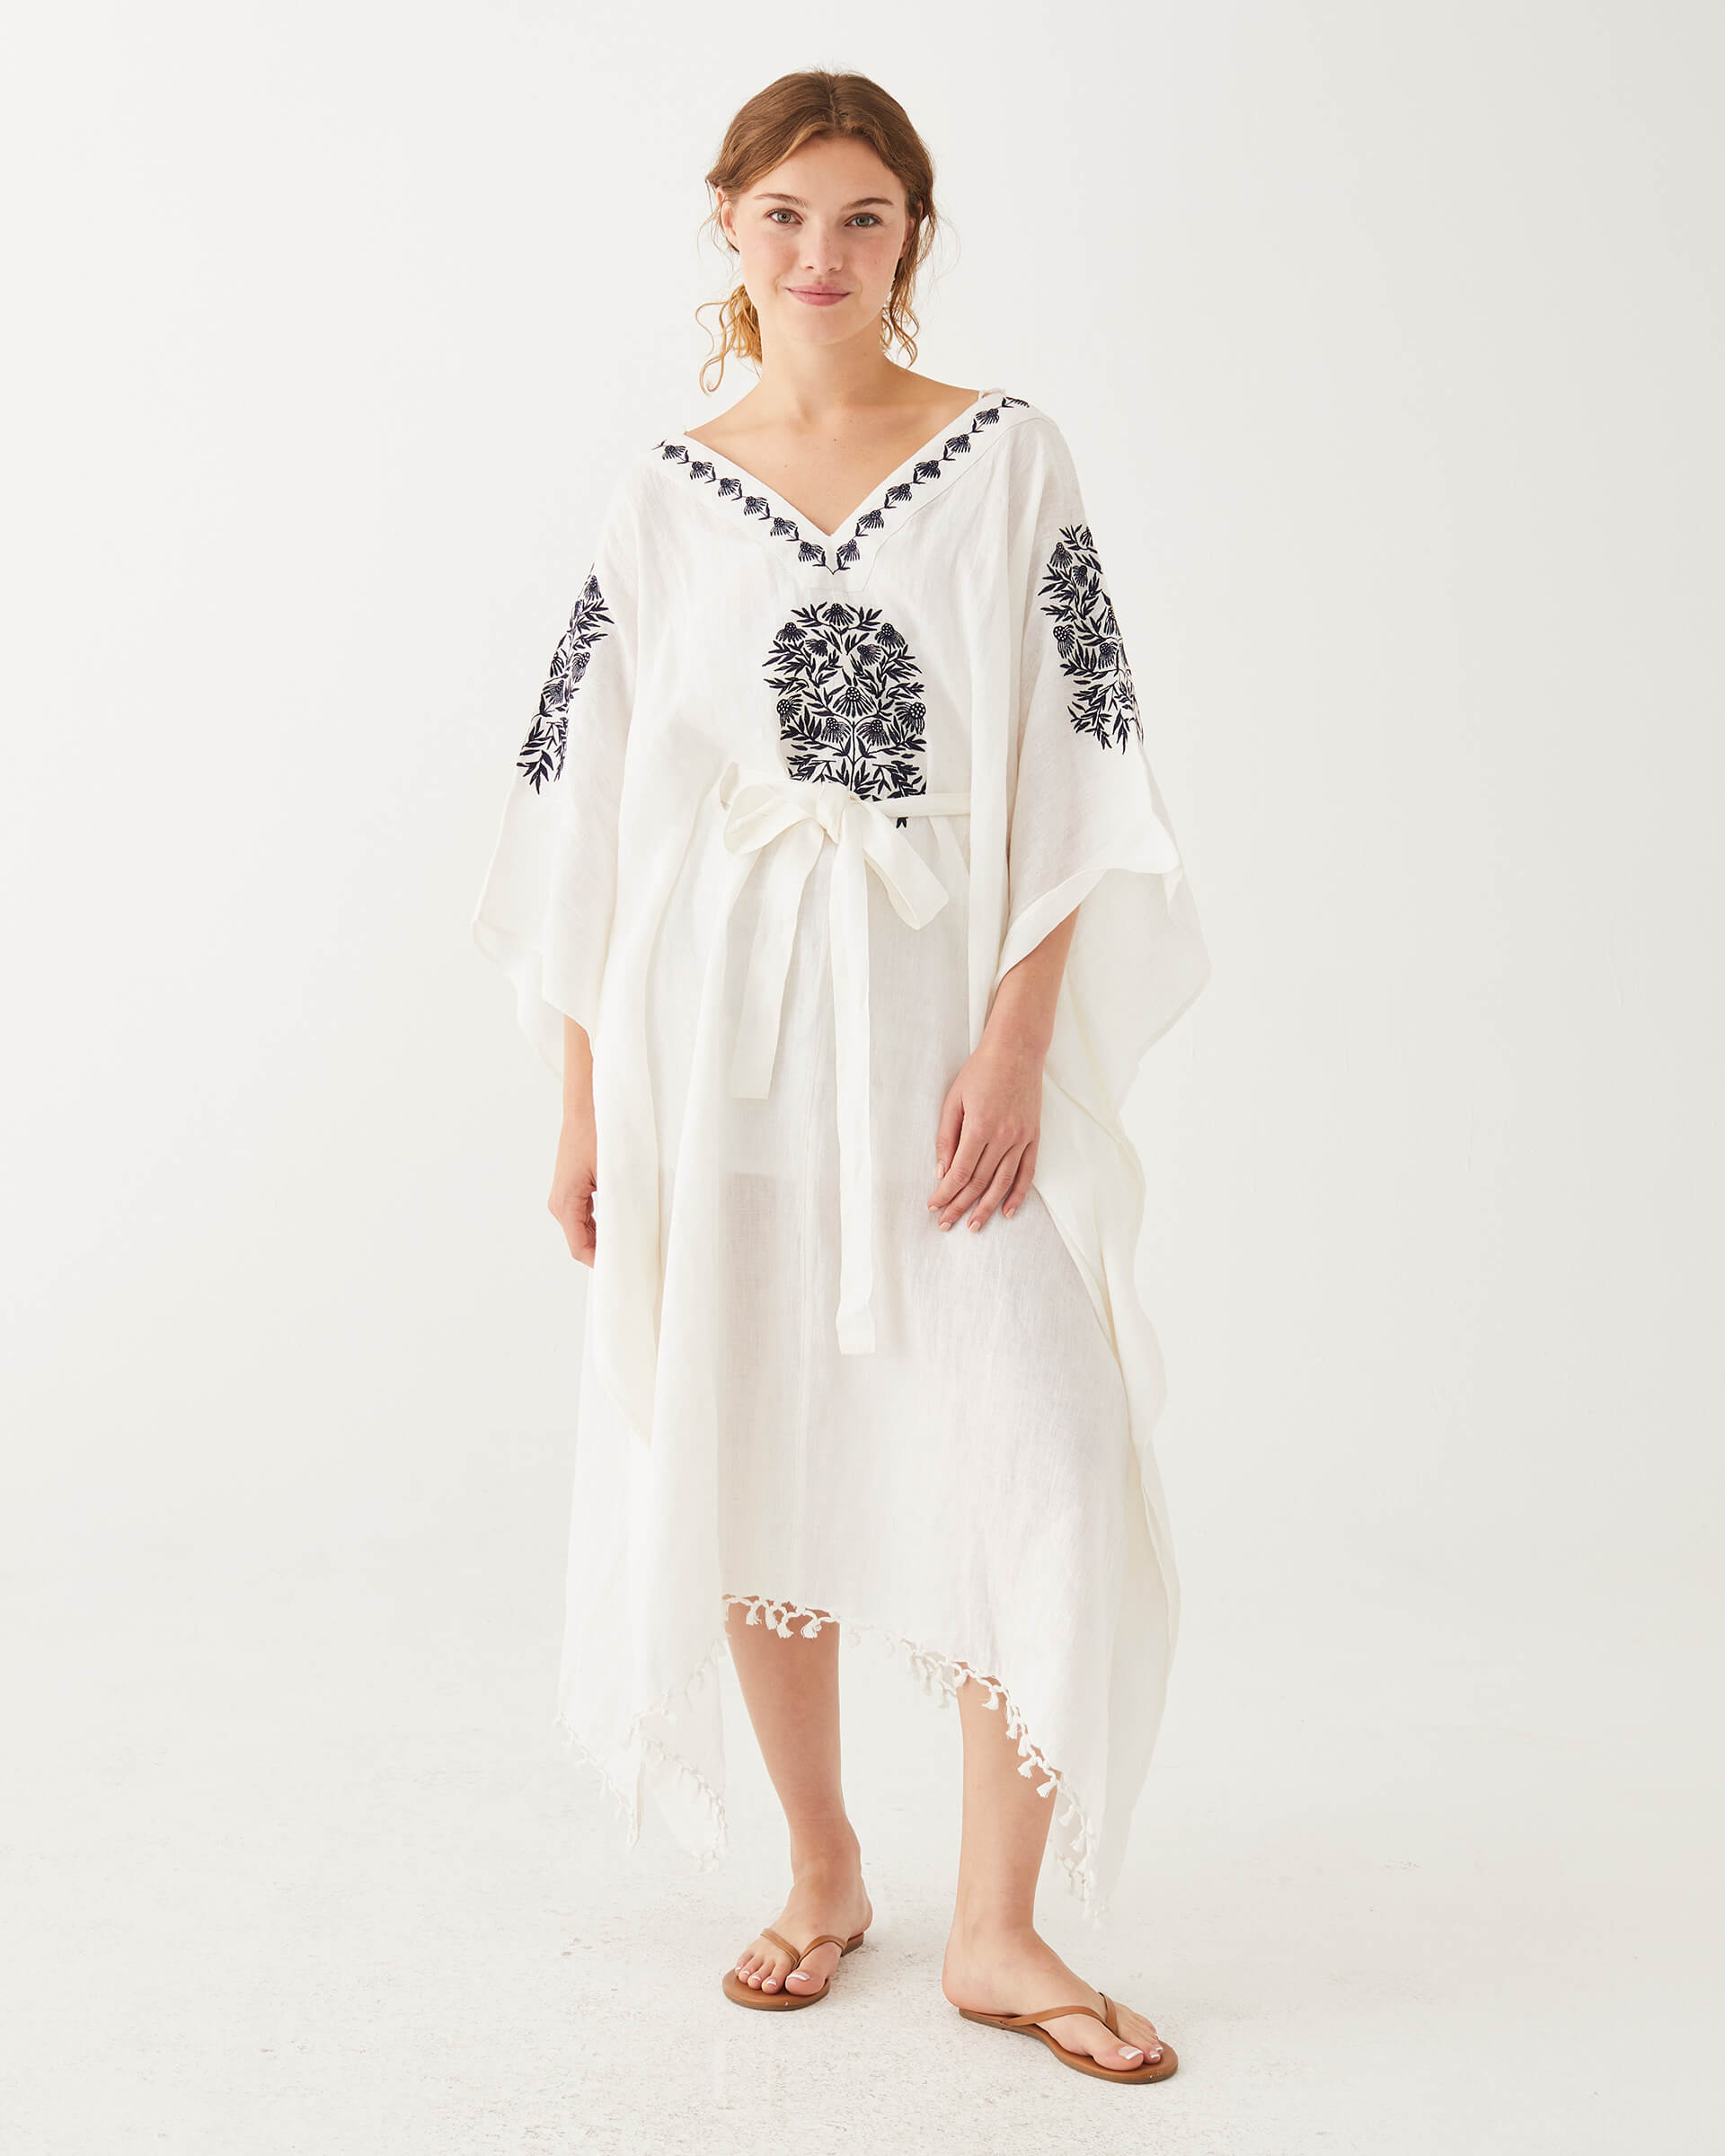 female wearing white and blue embroidered kaftan with v-neck and belt on a white background